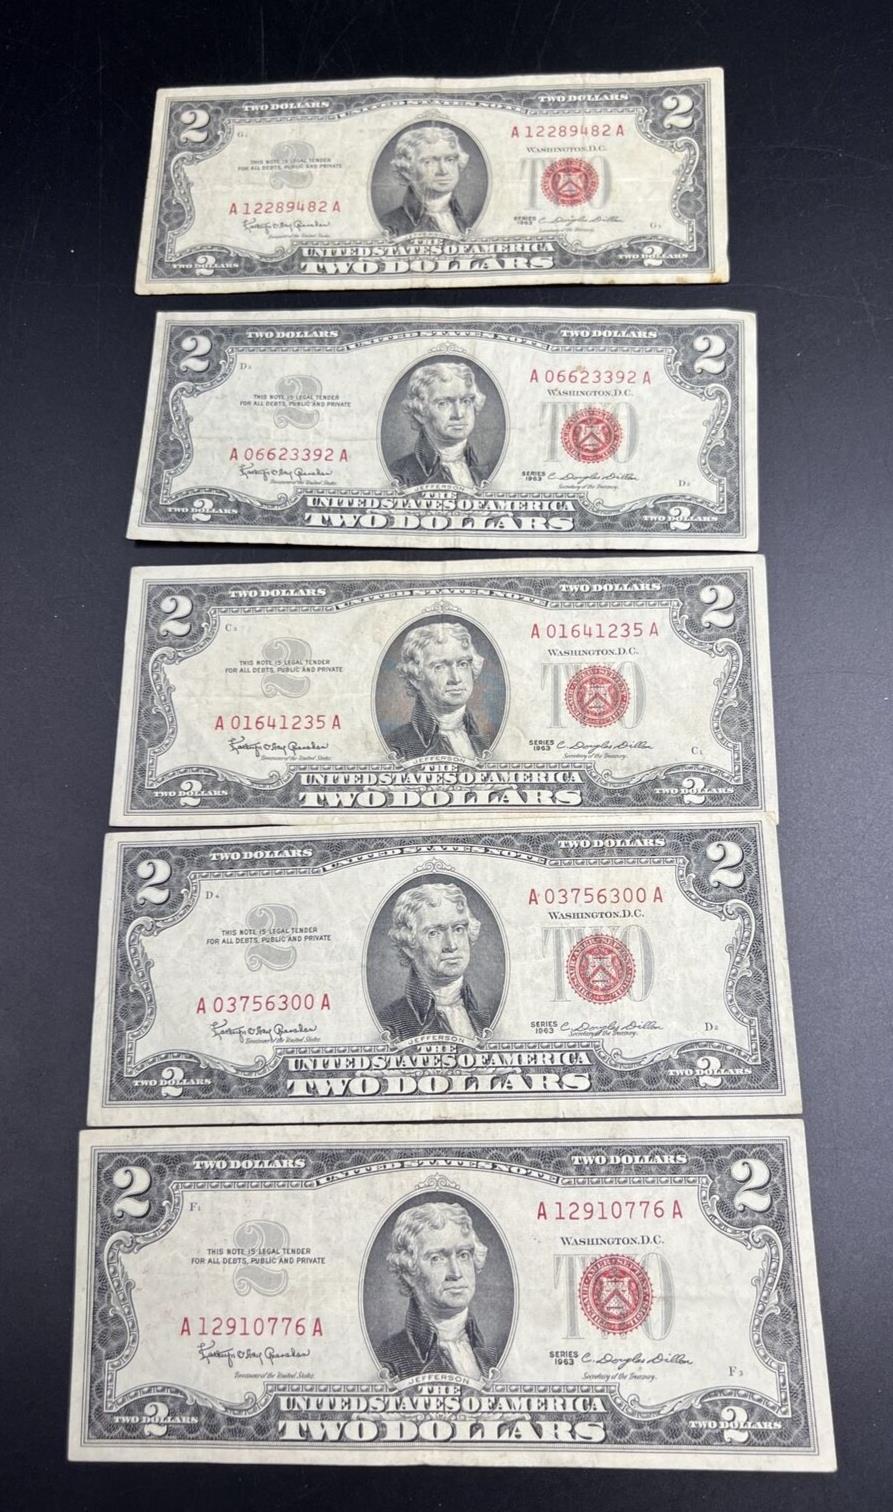 Lot of 5 1963 $2 US Two Dollar Currency Legal Tender Note Red Seal Bills VG+ #76